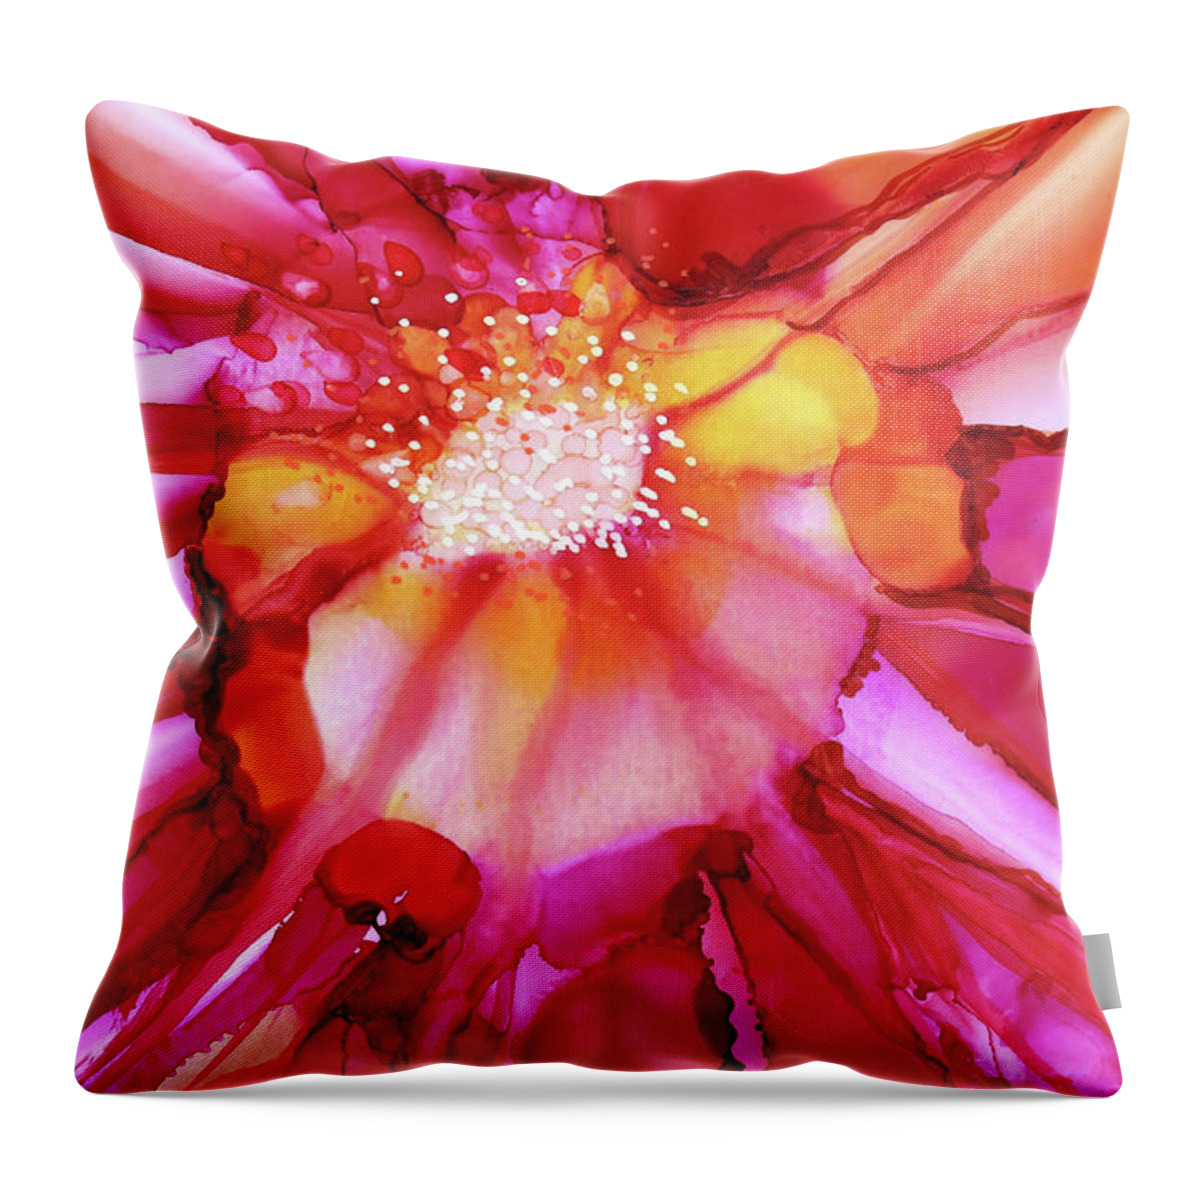  Throw Pillow featuring the painting Fuchsia by Julie Tibus